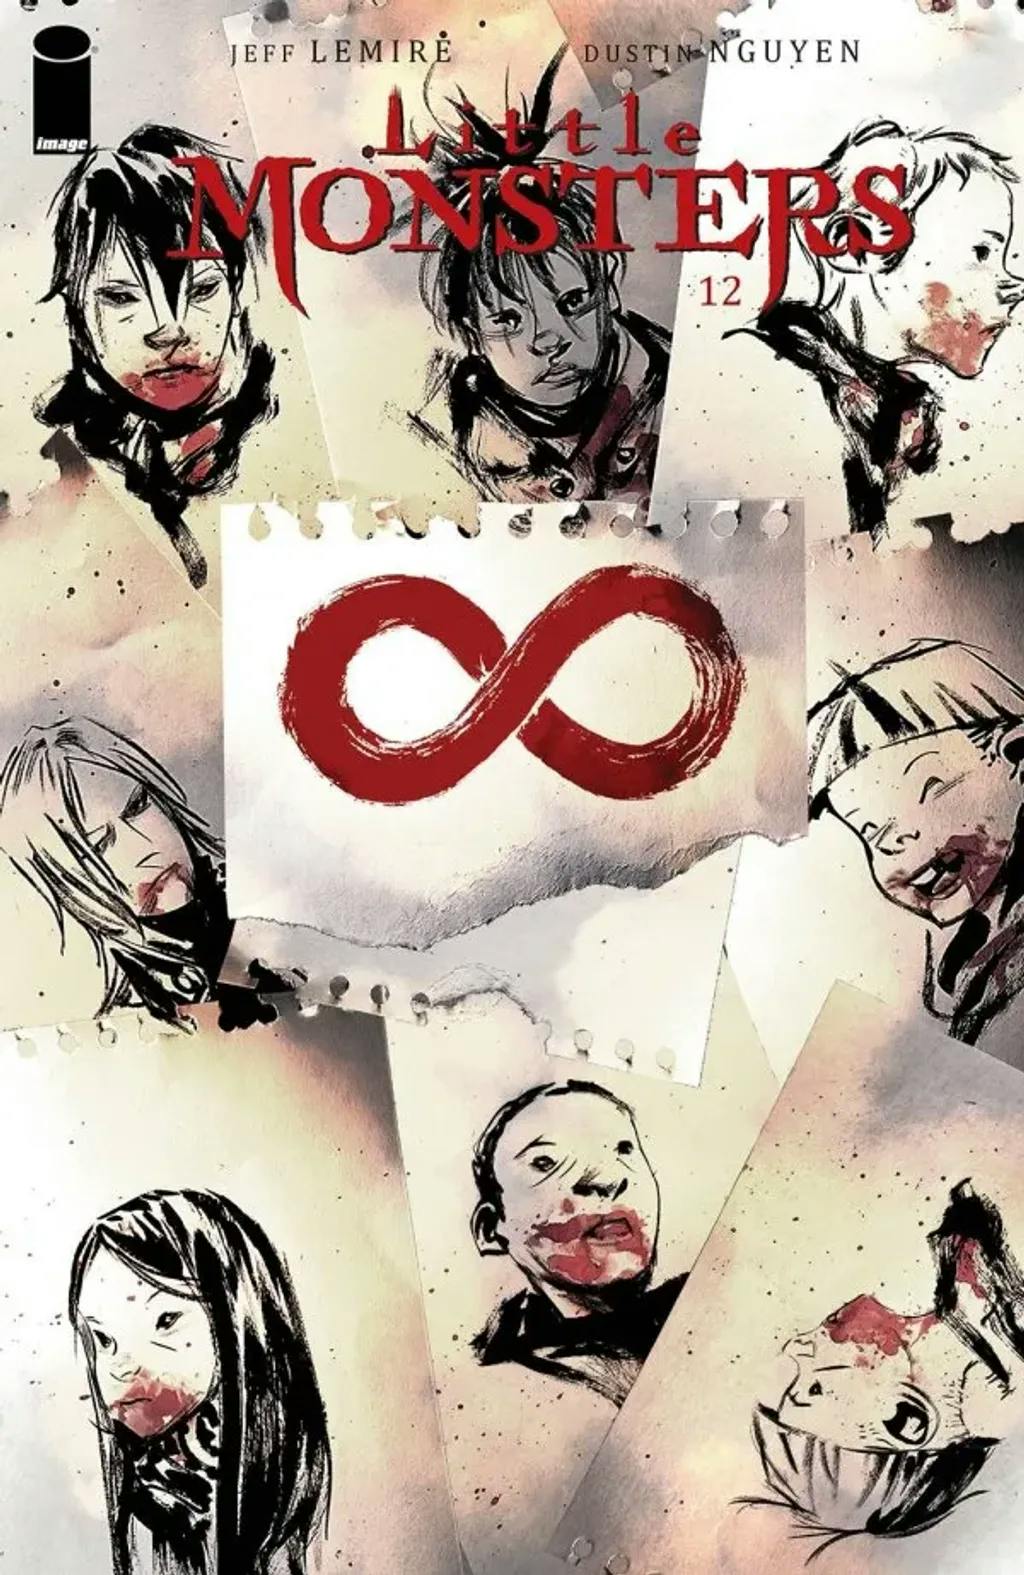 Little Monsters #12 By Jeff Lemire and Dustin Nguyen